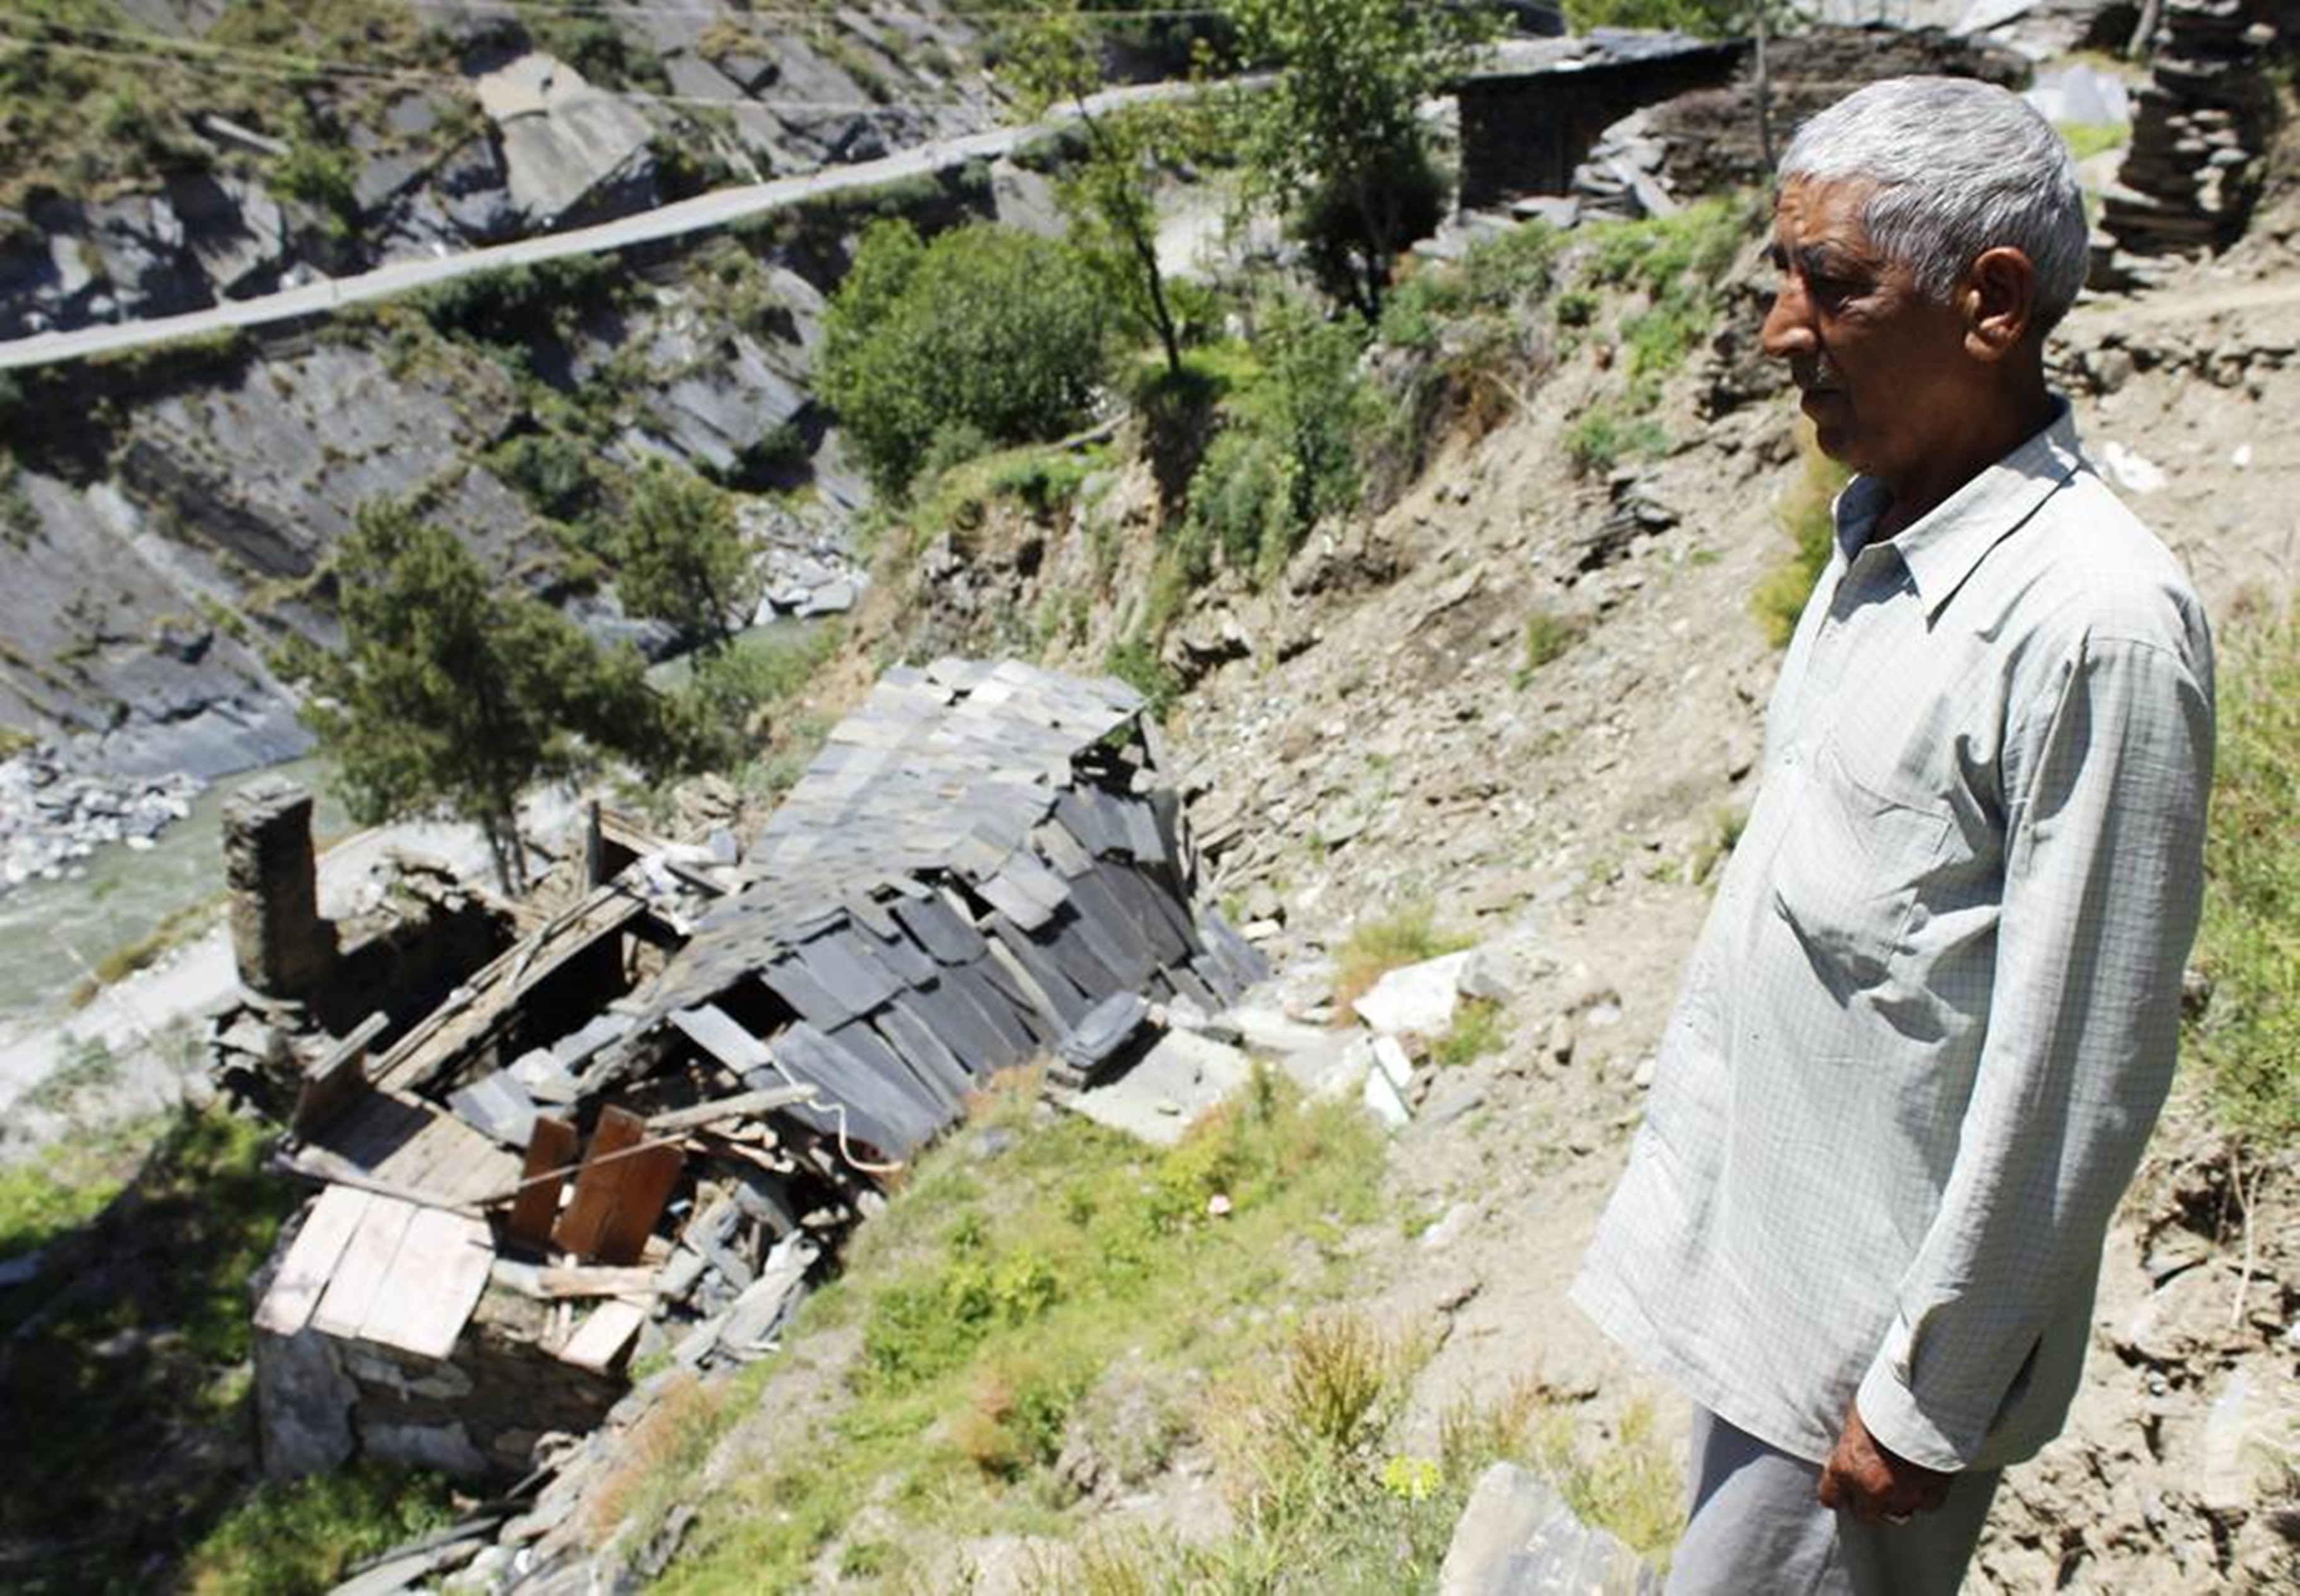 In April 2012 there was a massive leakage in the 16km HRT of the 231 MW, Chamera III project just above the Mokhar village in Chamba district leading to severe threat to the village downhill so much so that the 40 families residing there had to be evacuated. Shri Jagdish Sharma standing in front of the debris of his leftover house after the leakage tragedy .                                                                                                                                                 Pic Date : 29/04/2014